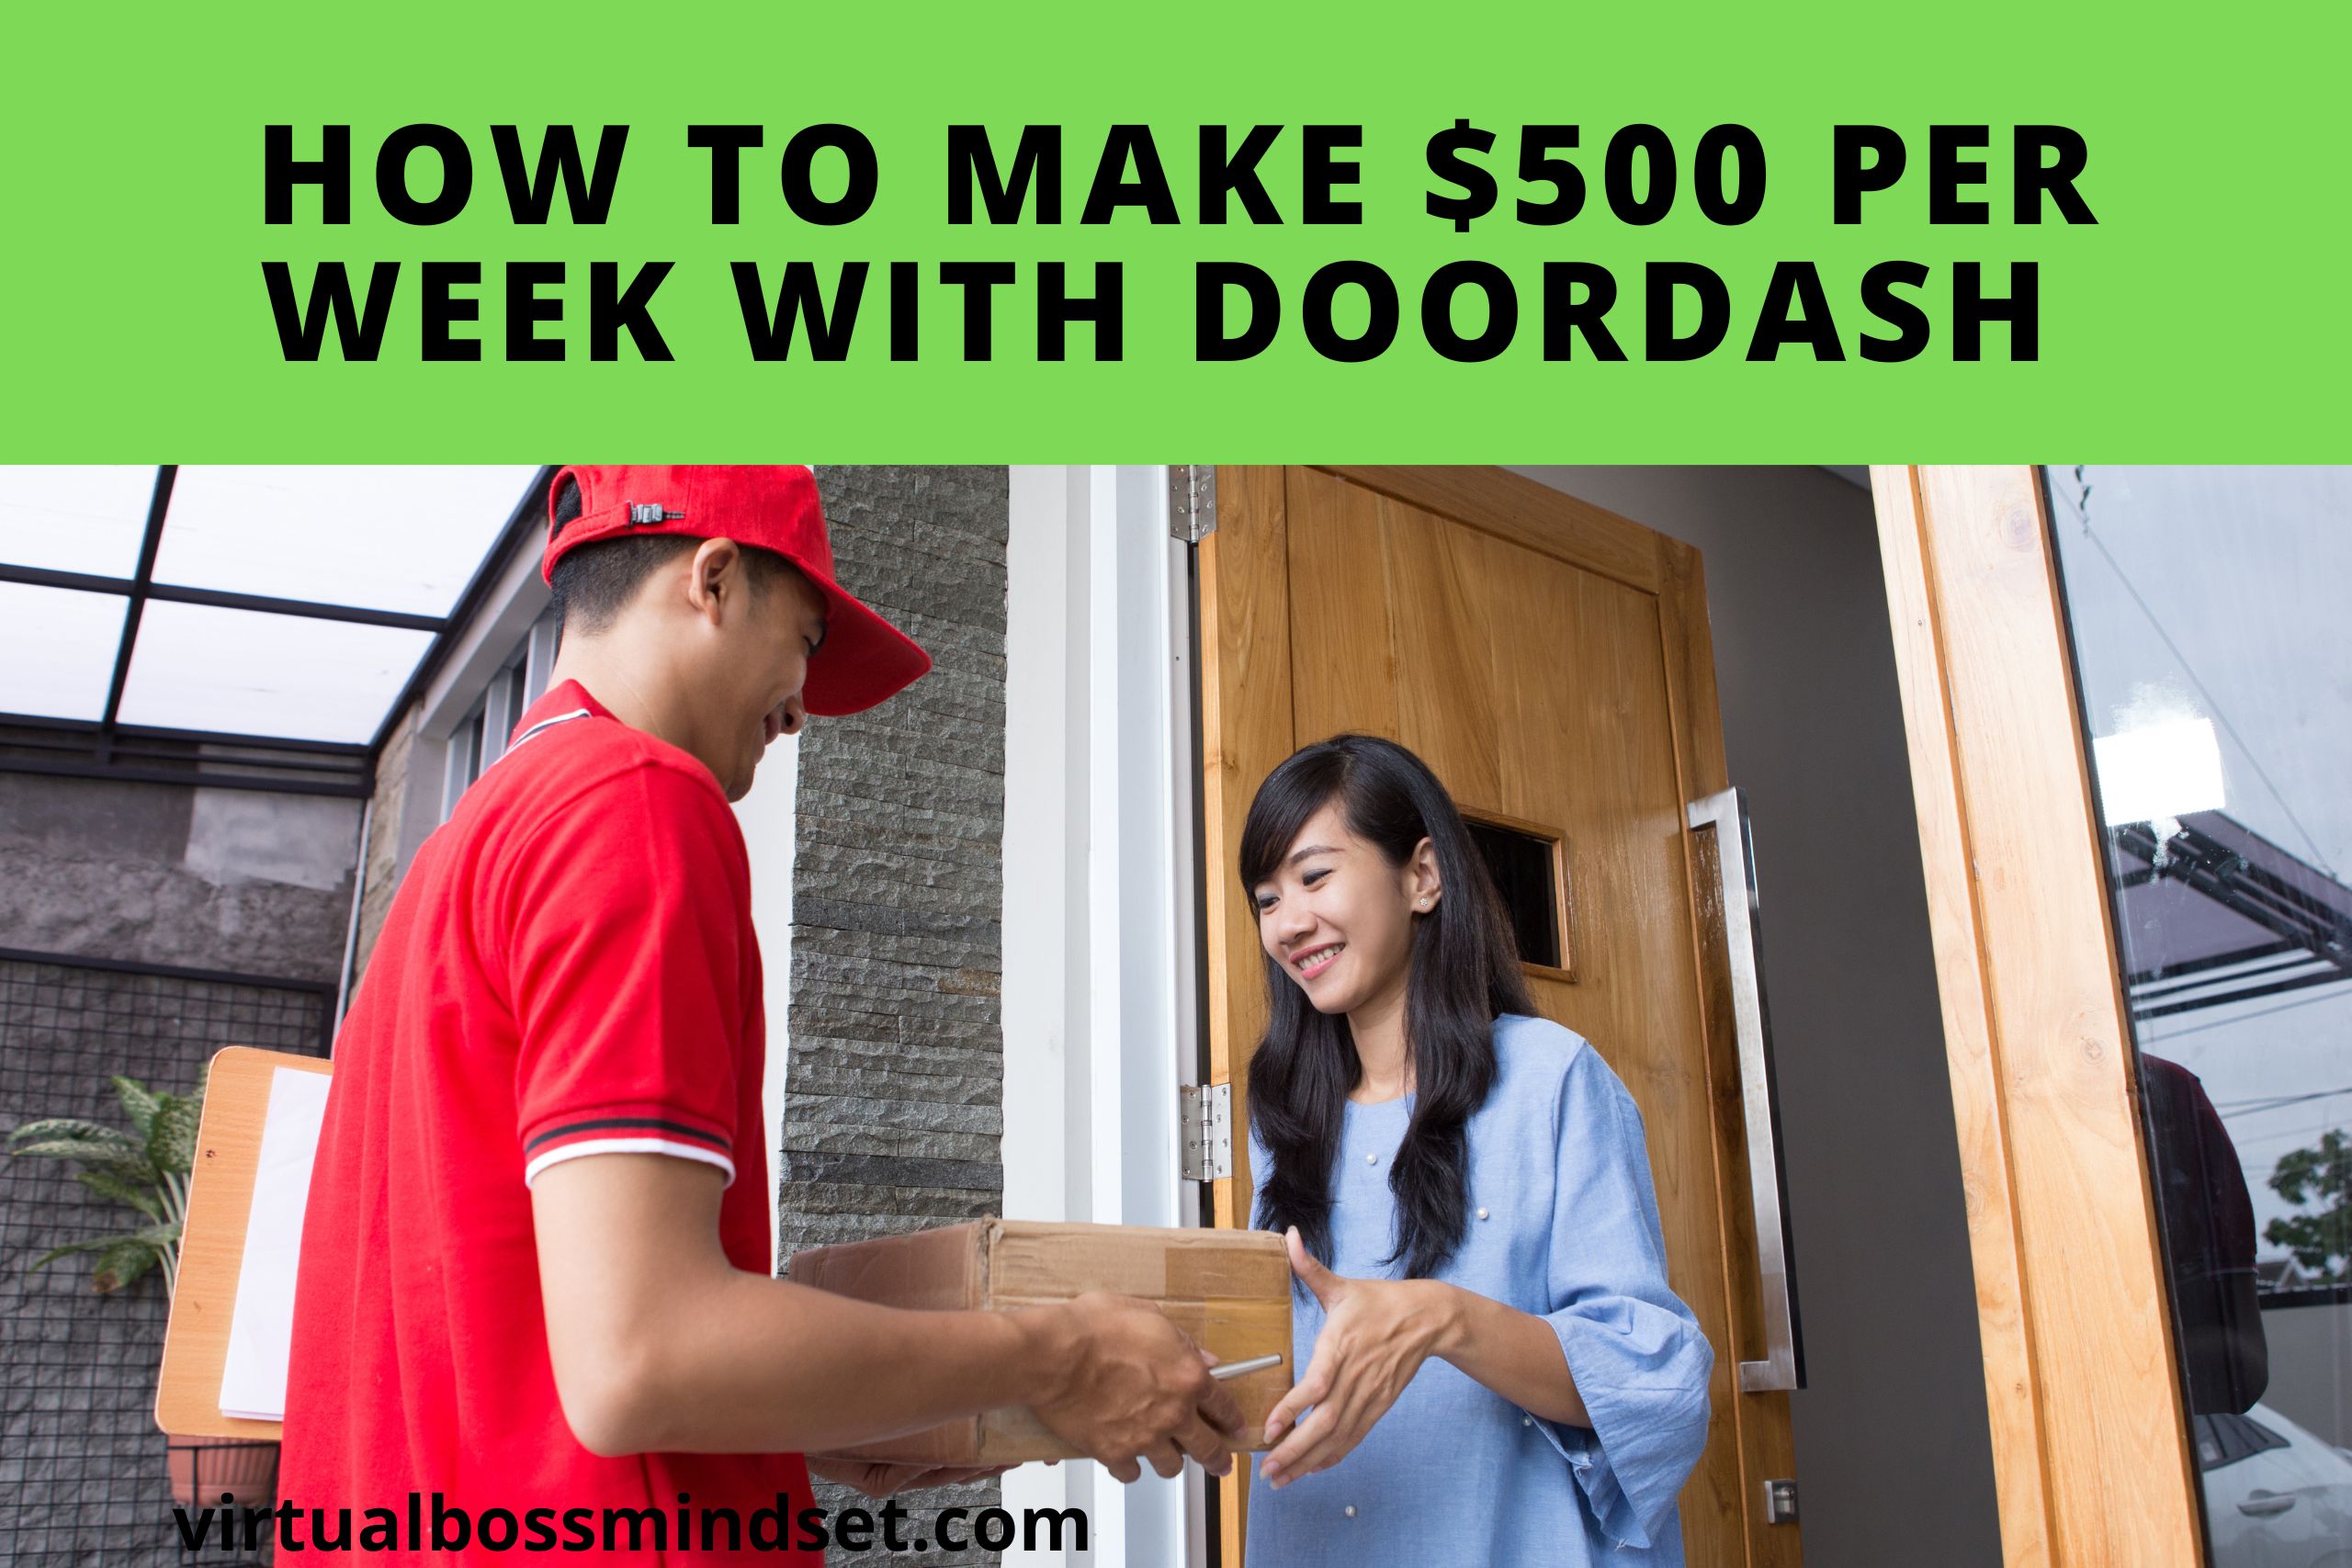 How to Make $500 a Week with DoorDash